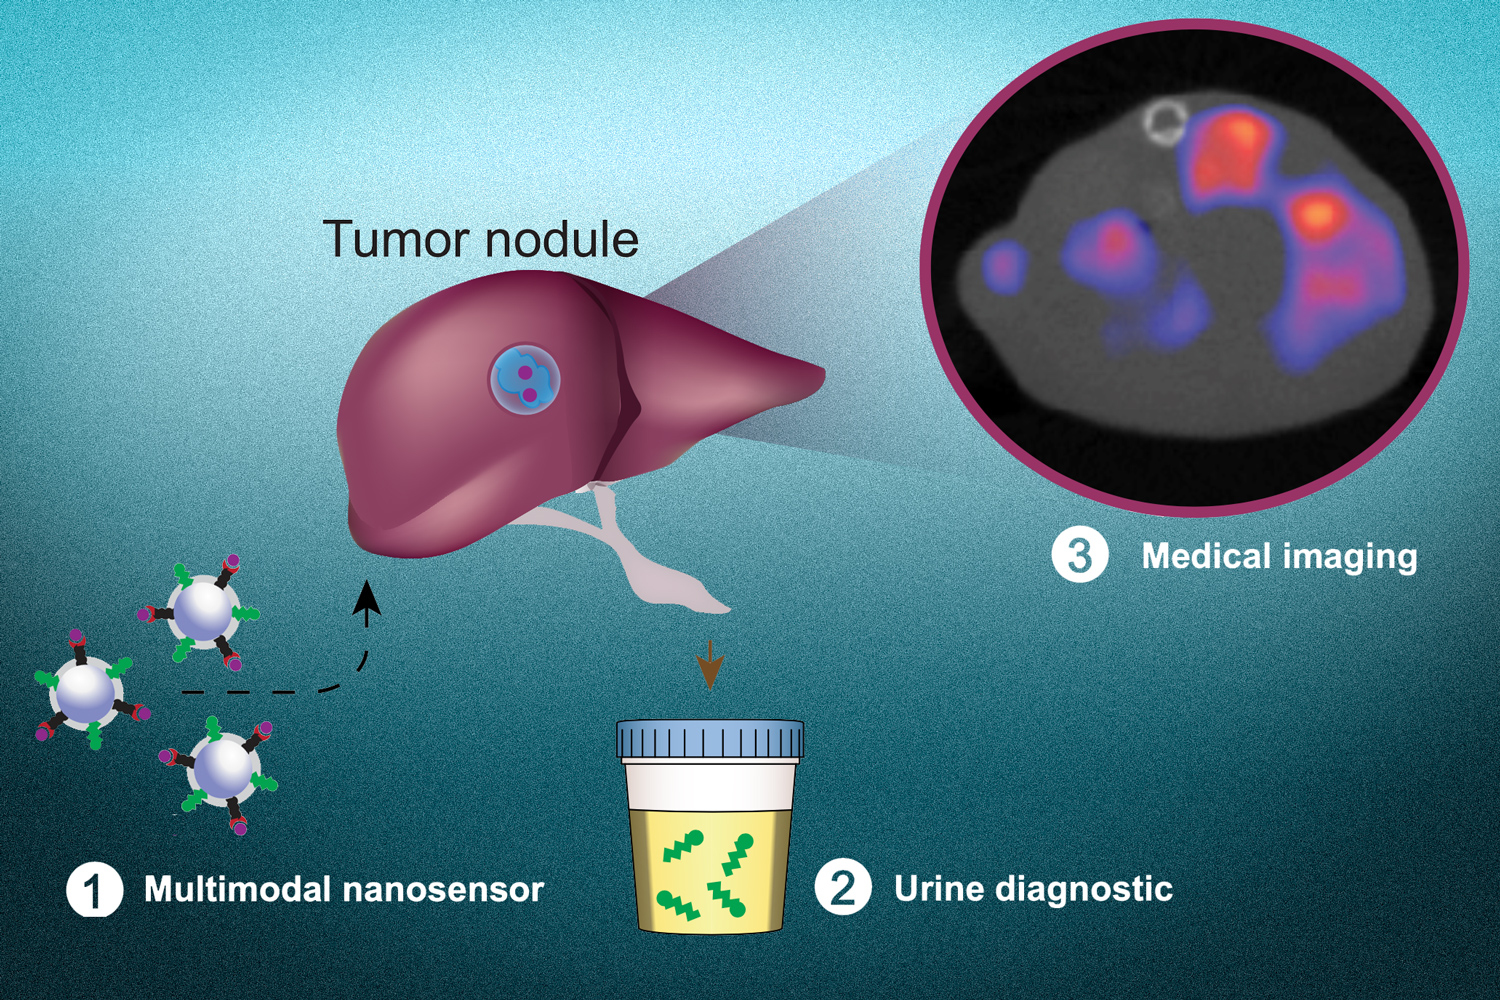 A noninvasive test to detect cancer cells and pinpoint their location